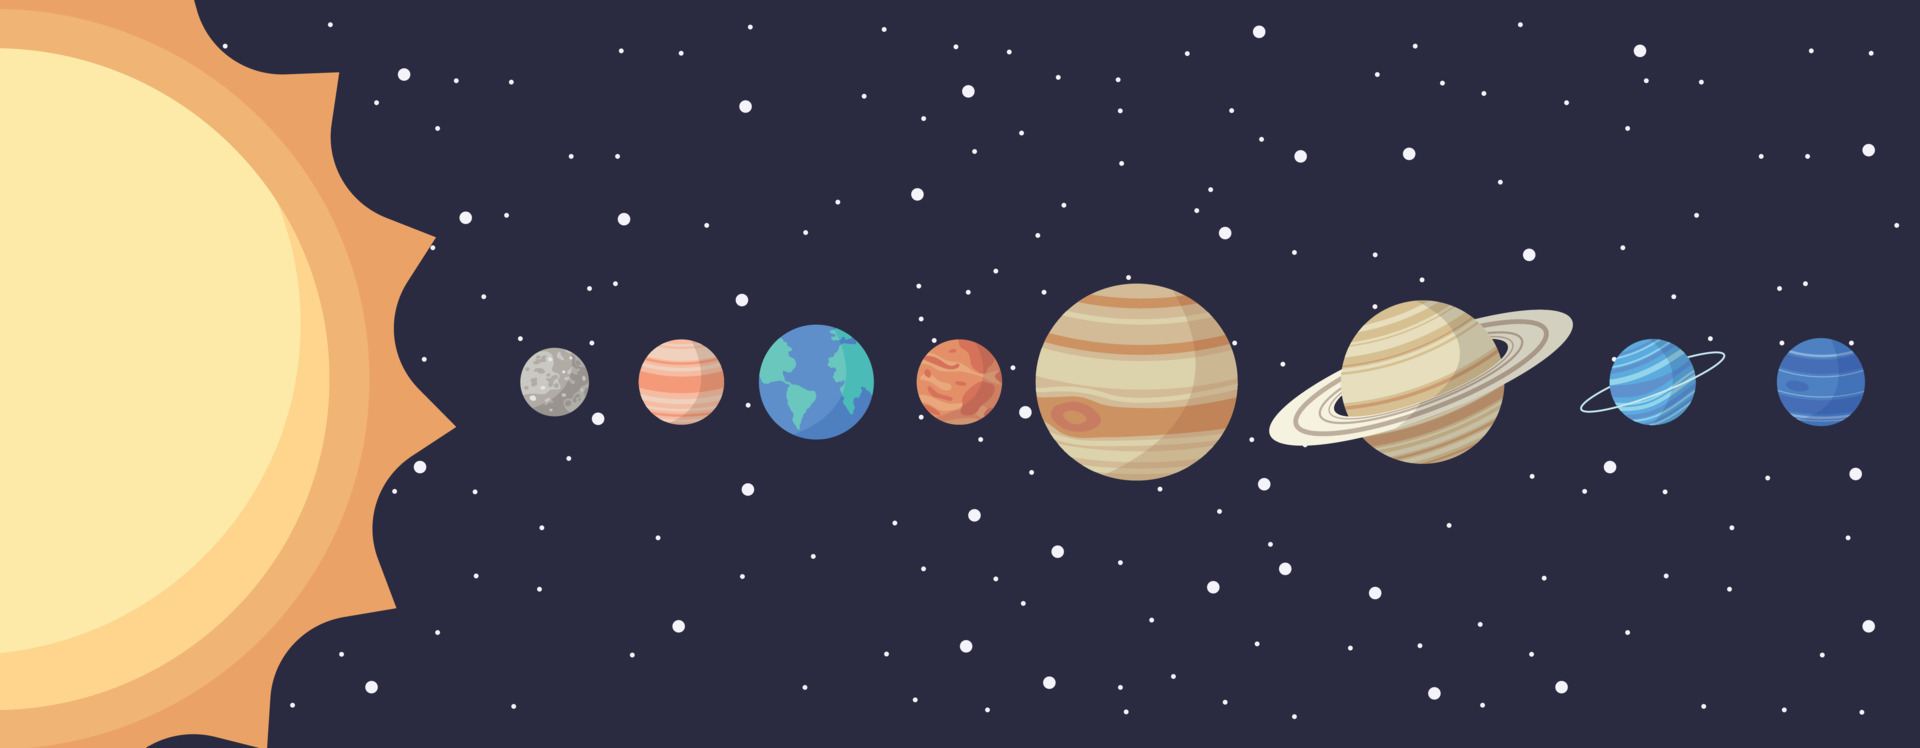 Set of cartoon solar system planets. Children s education. Vector  illustration of cartoon solar system planets in order from the sun.  infographic illustration for school education or space exploration 14894313  Vector Art